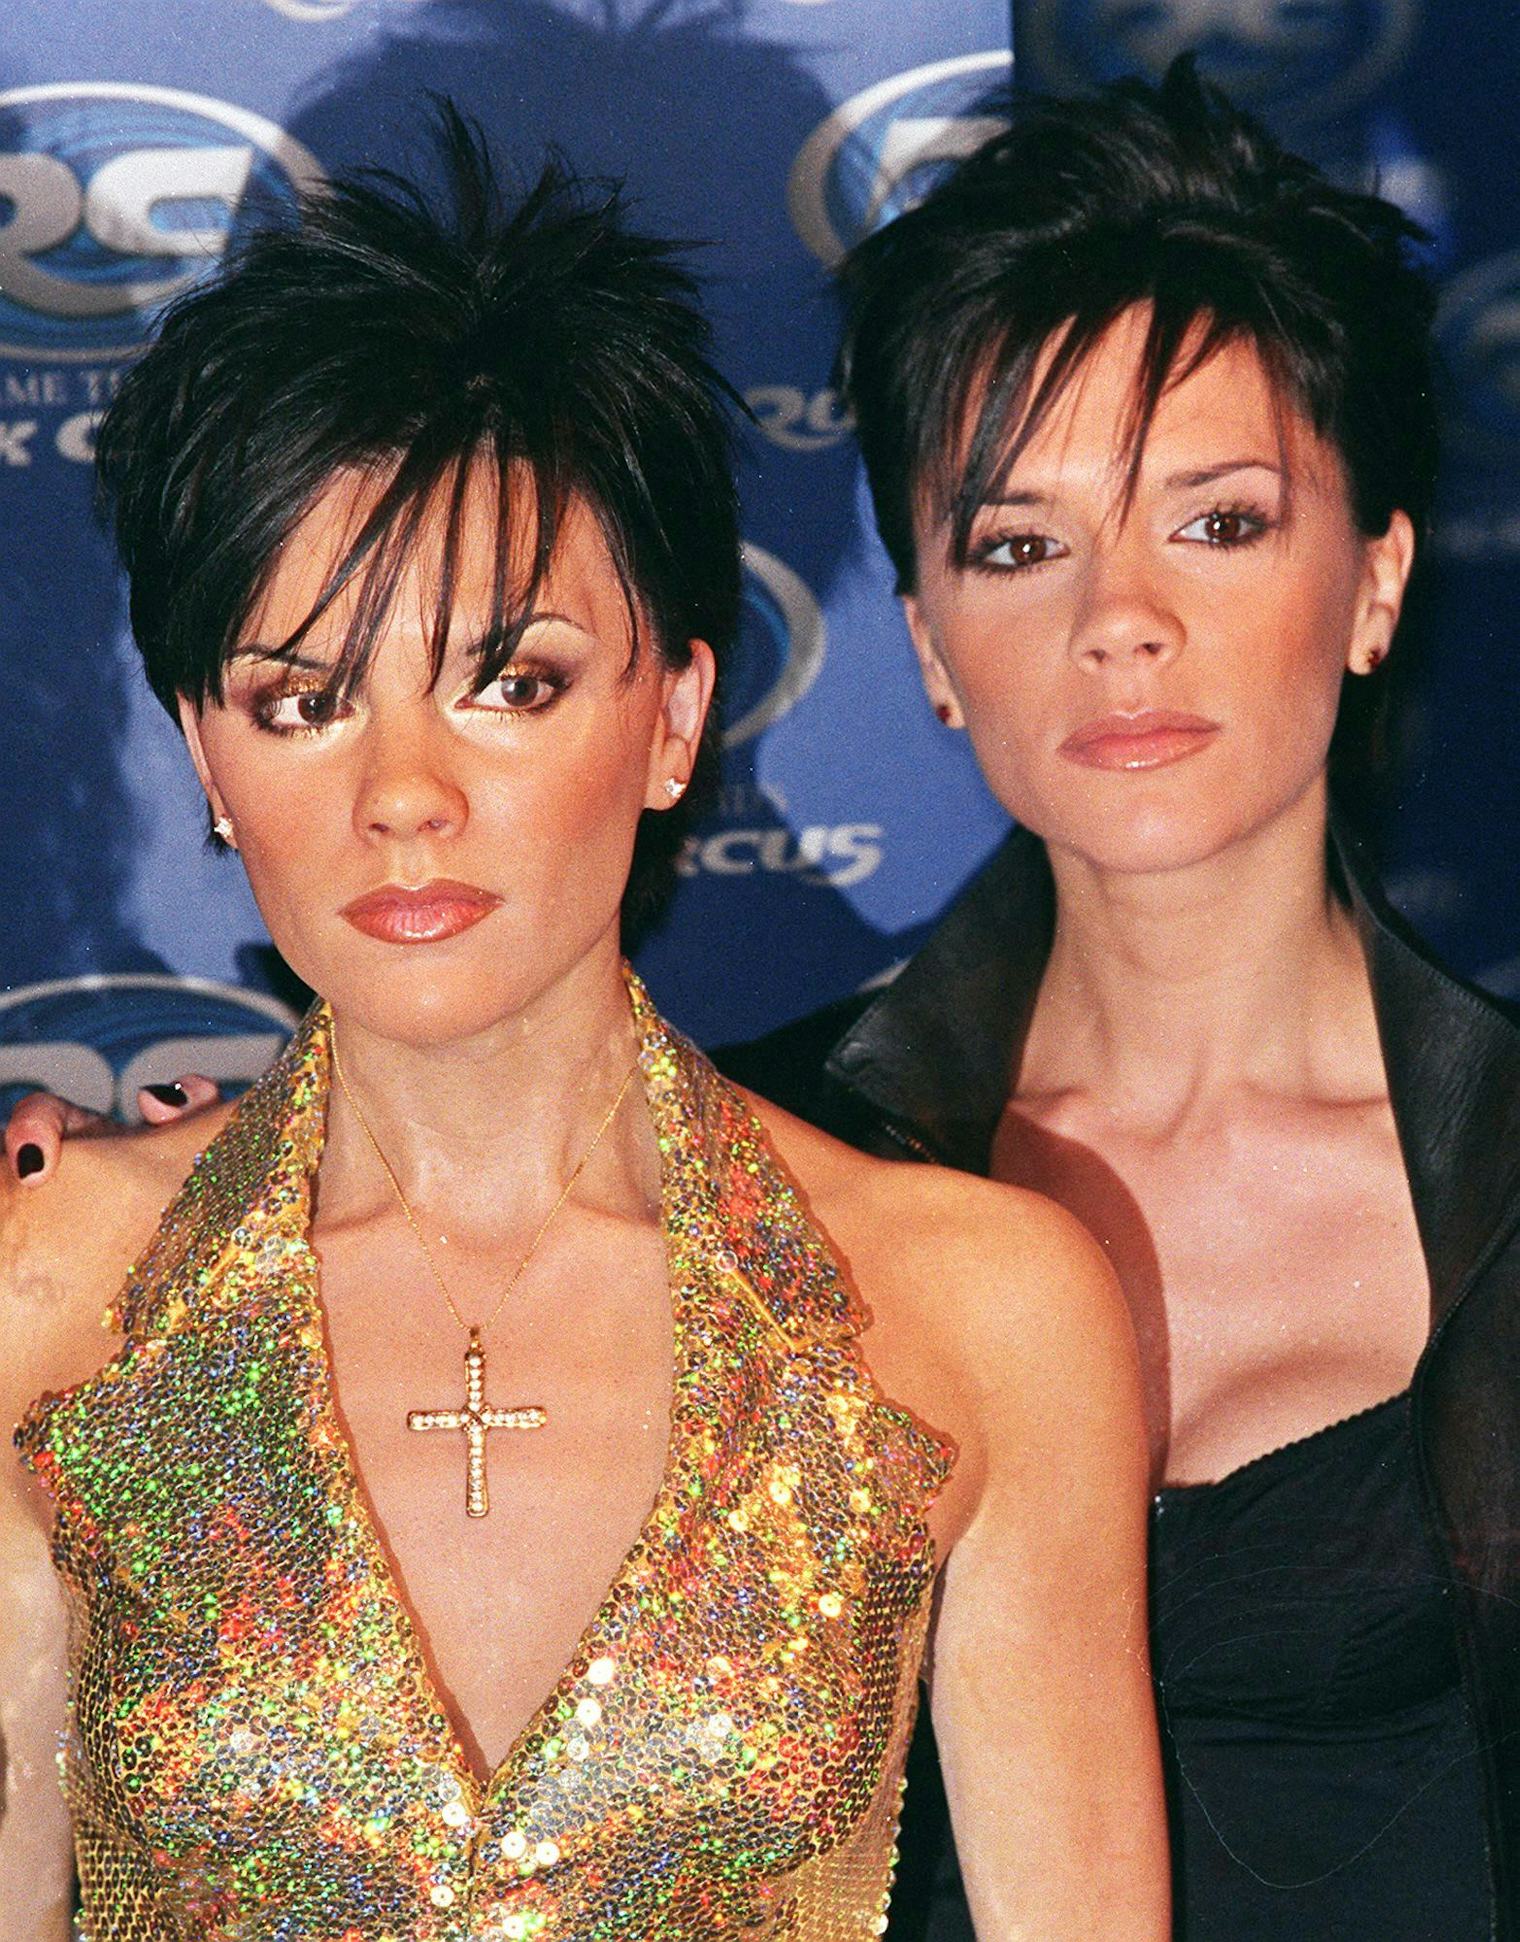 19 Of The Best Spiky Hairstyles From The Early 2000s — PHOTOS